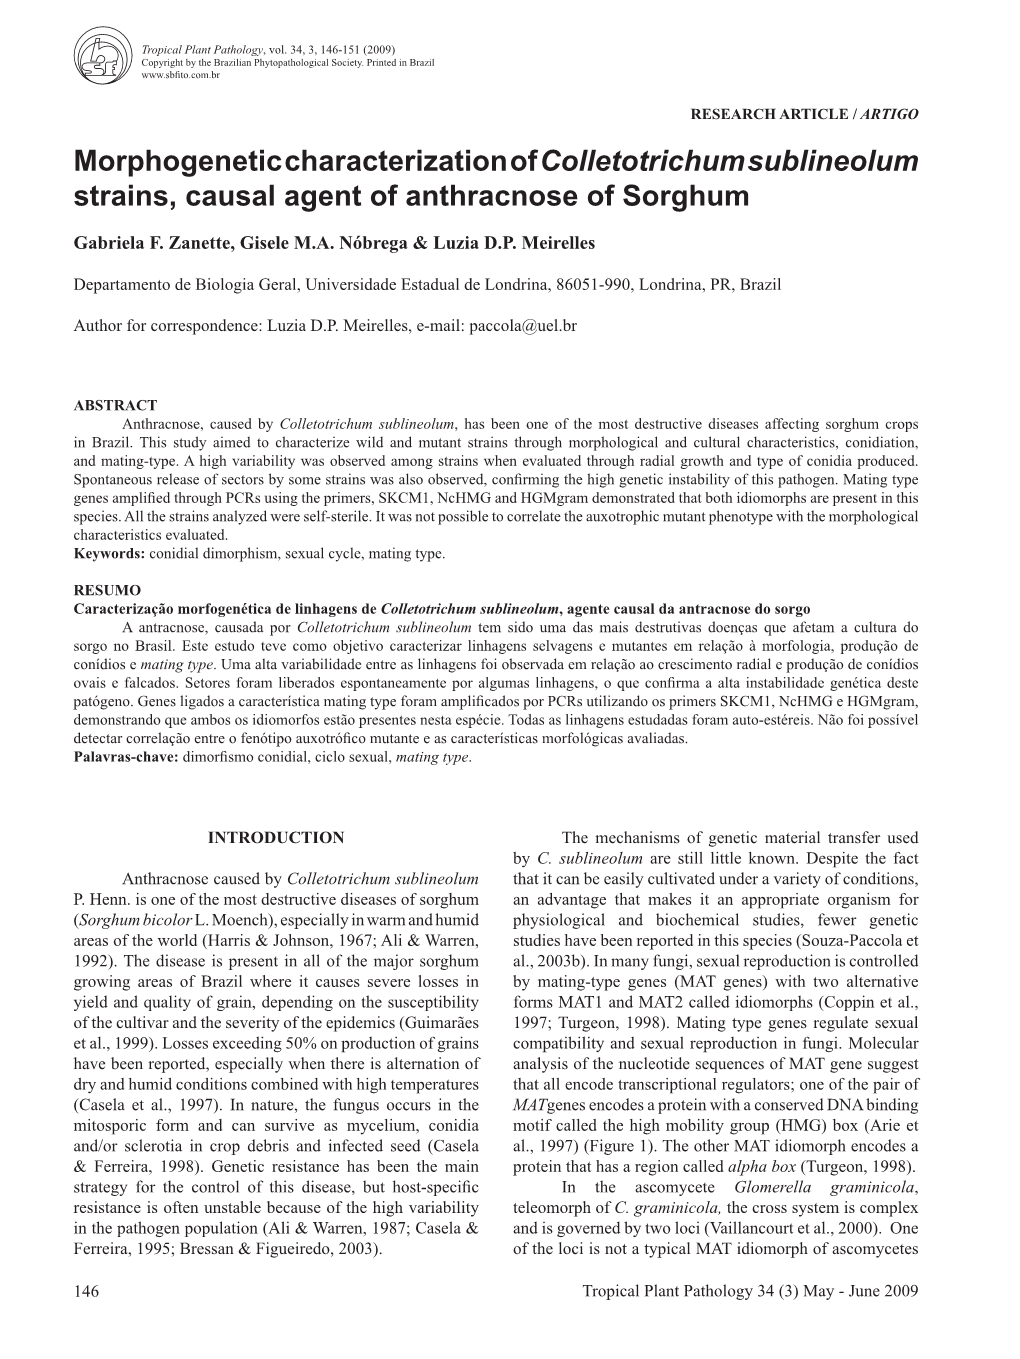 Morphogenetic Characterization of Colletotrichum Sublineolum Strains, Causal Agent of Anthracnose of Sorghum